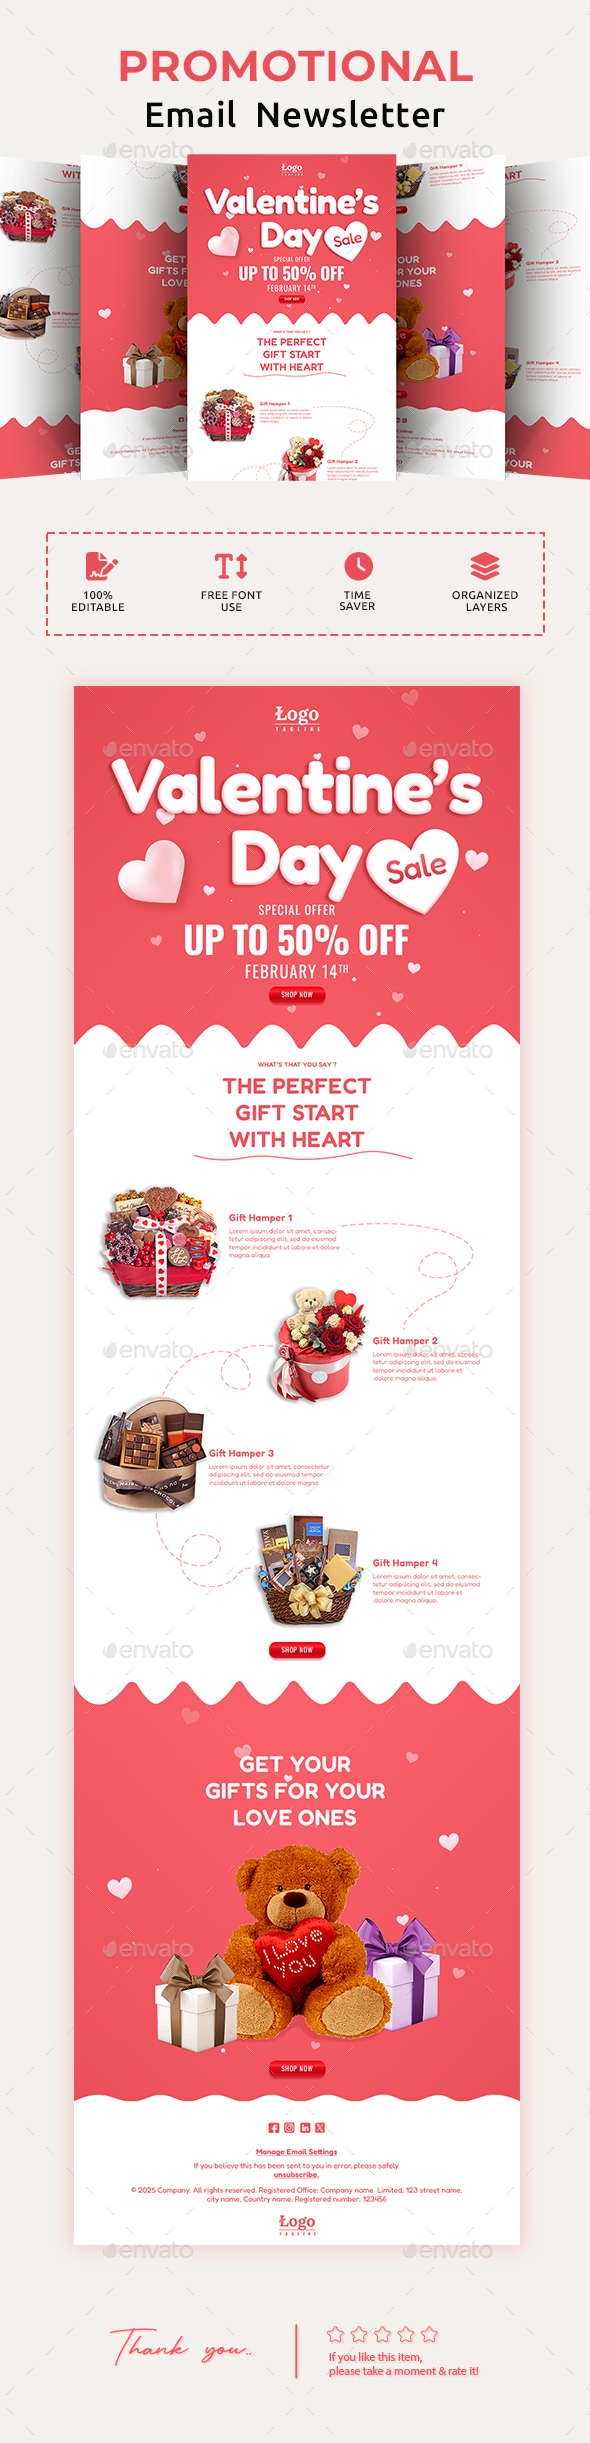 [DOWNLOAD]Valentine's Day Gift Shop Email Newsletter PSD Template